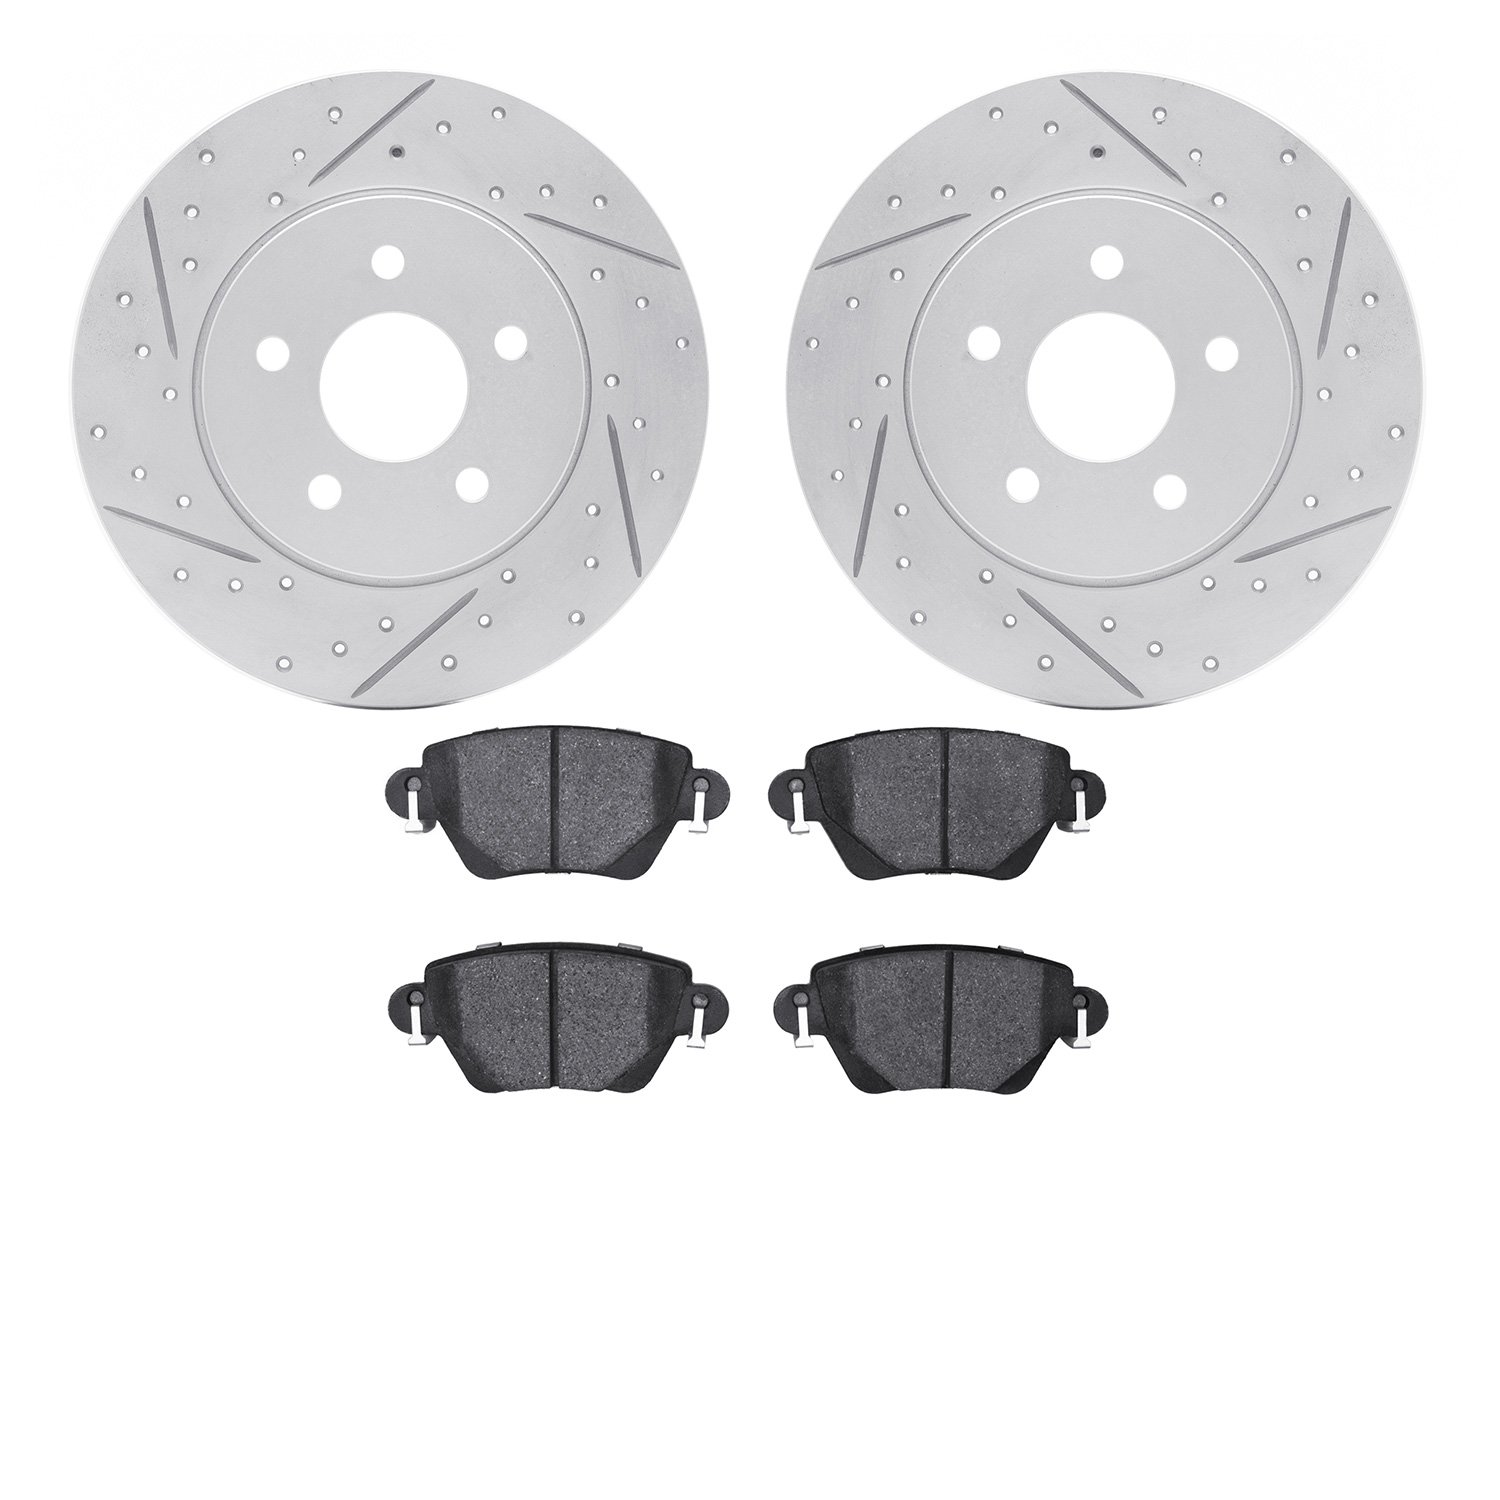 2502-20008 Geoperformance Drilled/Slotted Rotors w/5000 Advanced Brake Pads Kit, 2001-2004 Multiple Makes/Models, Position: Rear